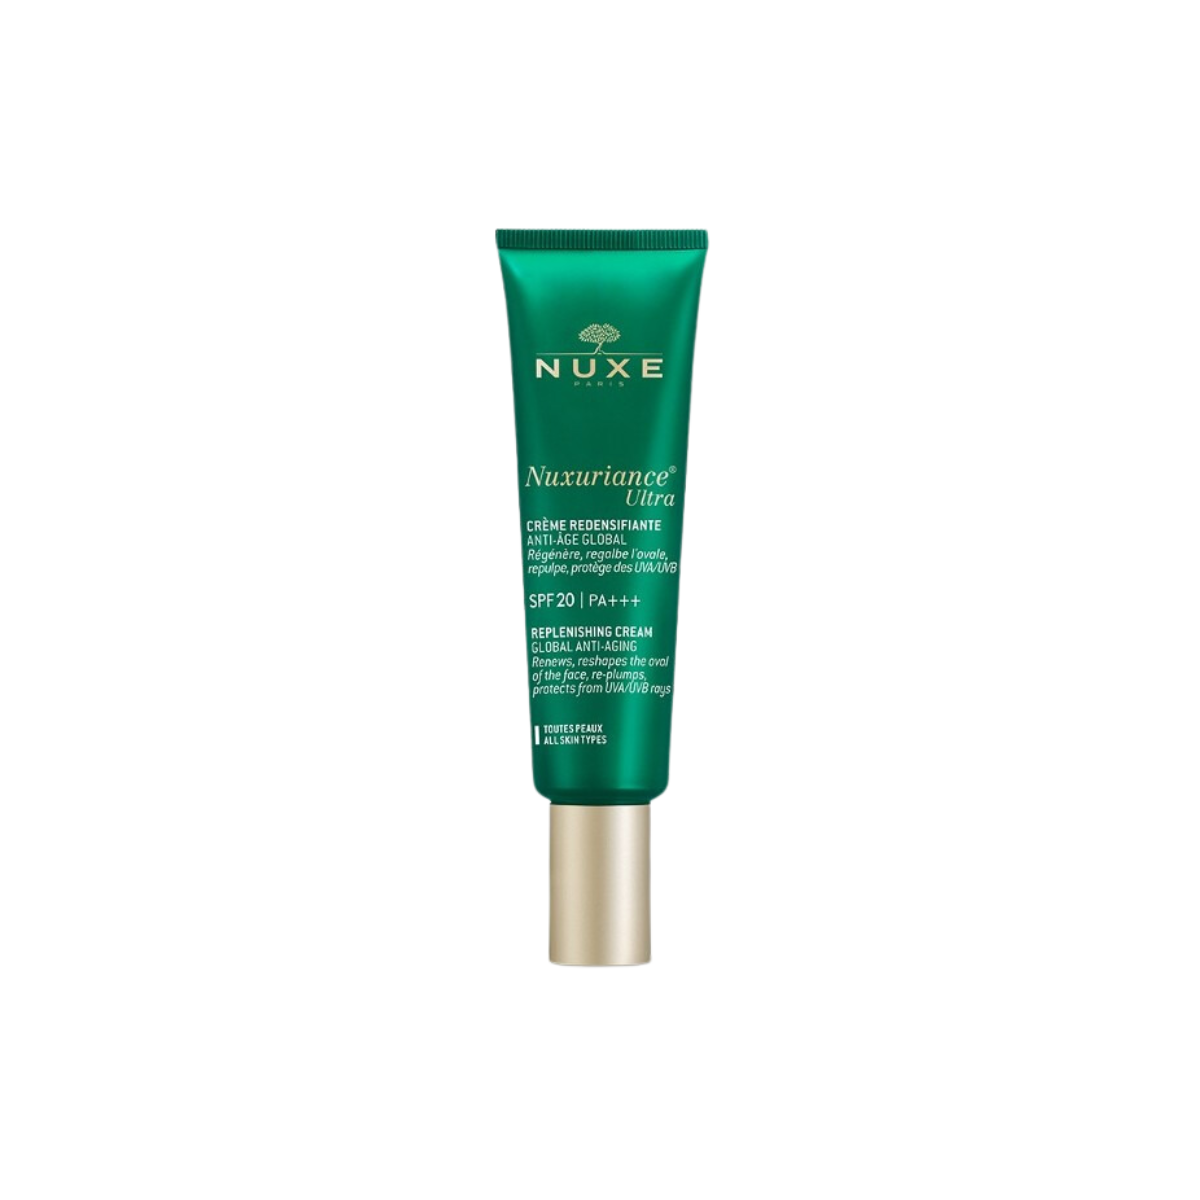 Nuxe Nuxuriance Ultra Crème Redensifiante Anti-Age Global SPF20, 50ml